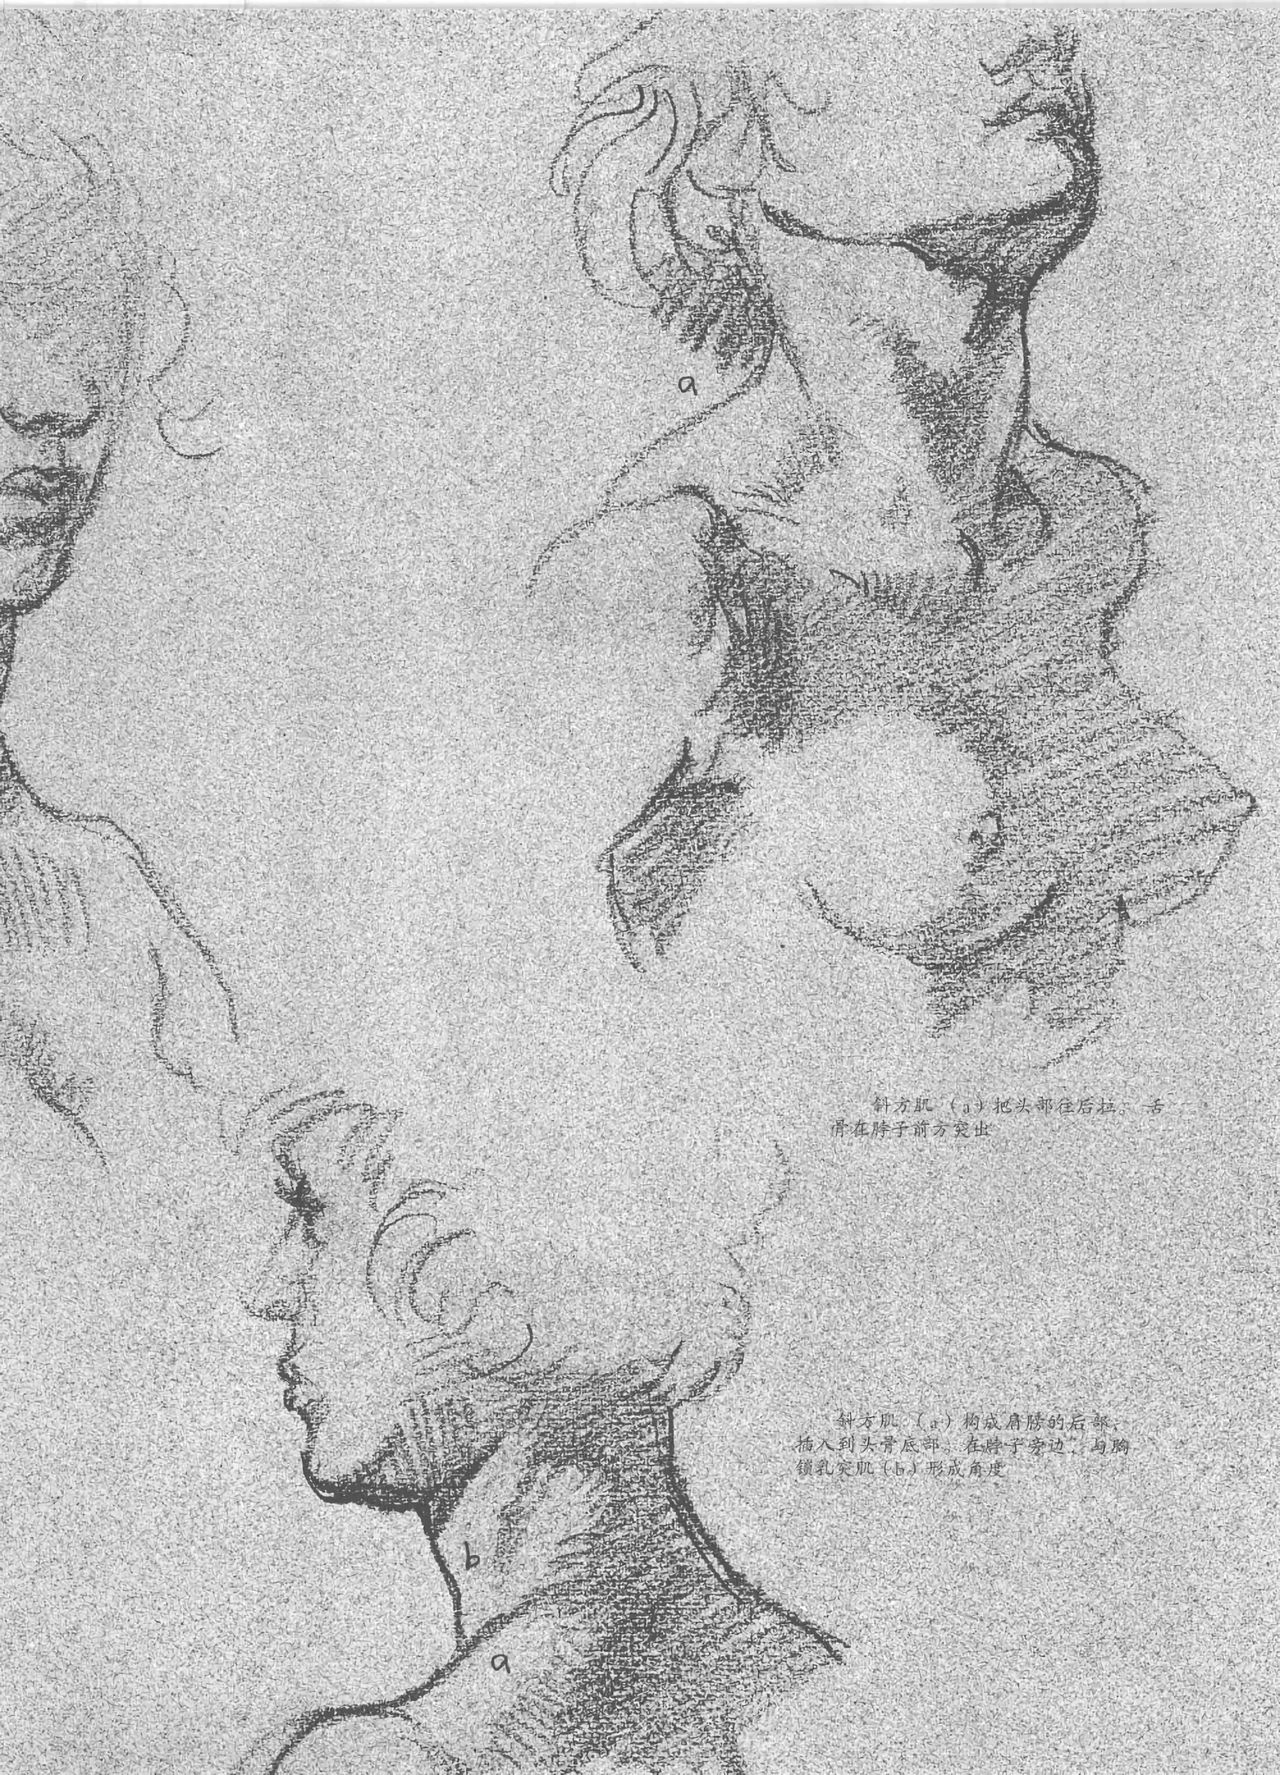 Anatomy-A Complete Guide for Artists - Joseph Sheppard [Chinese] 191